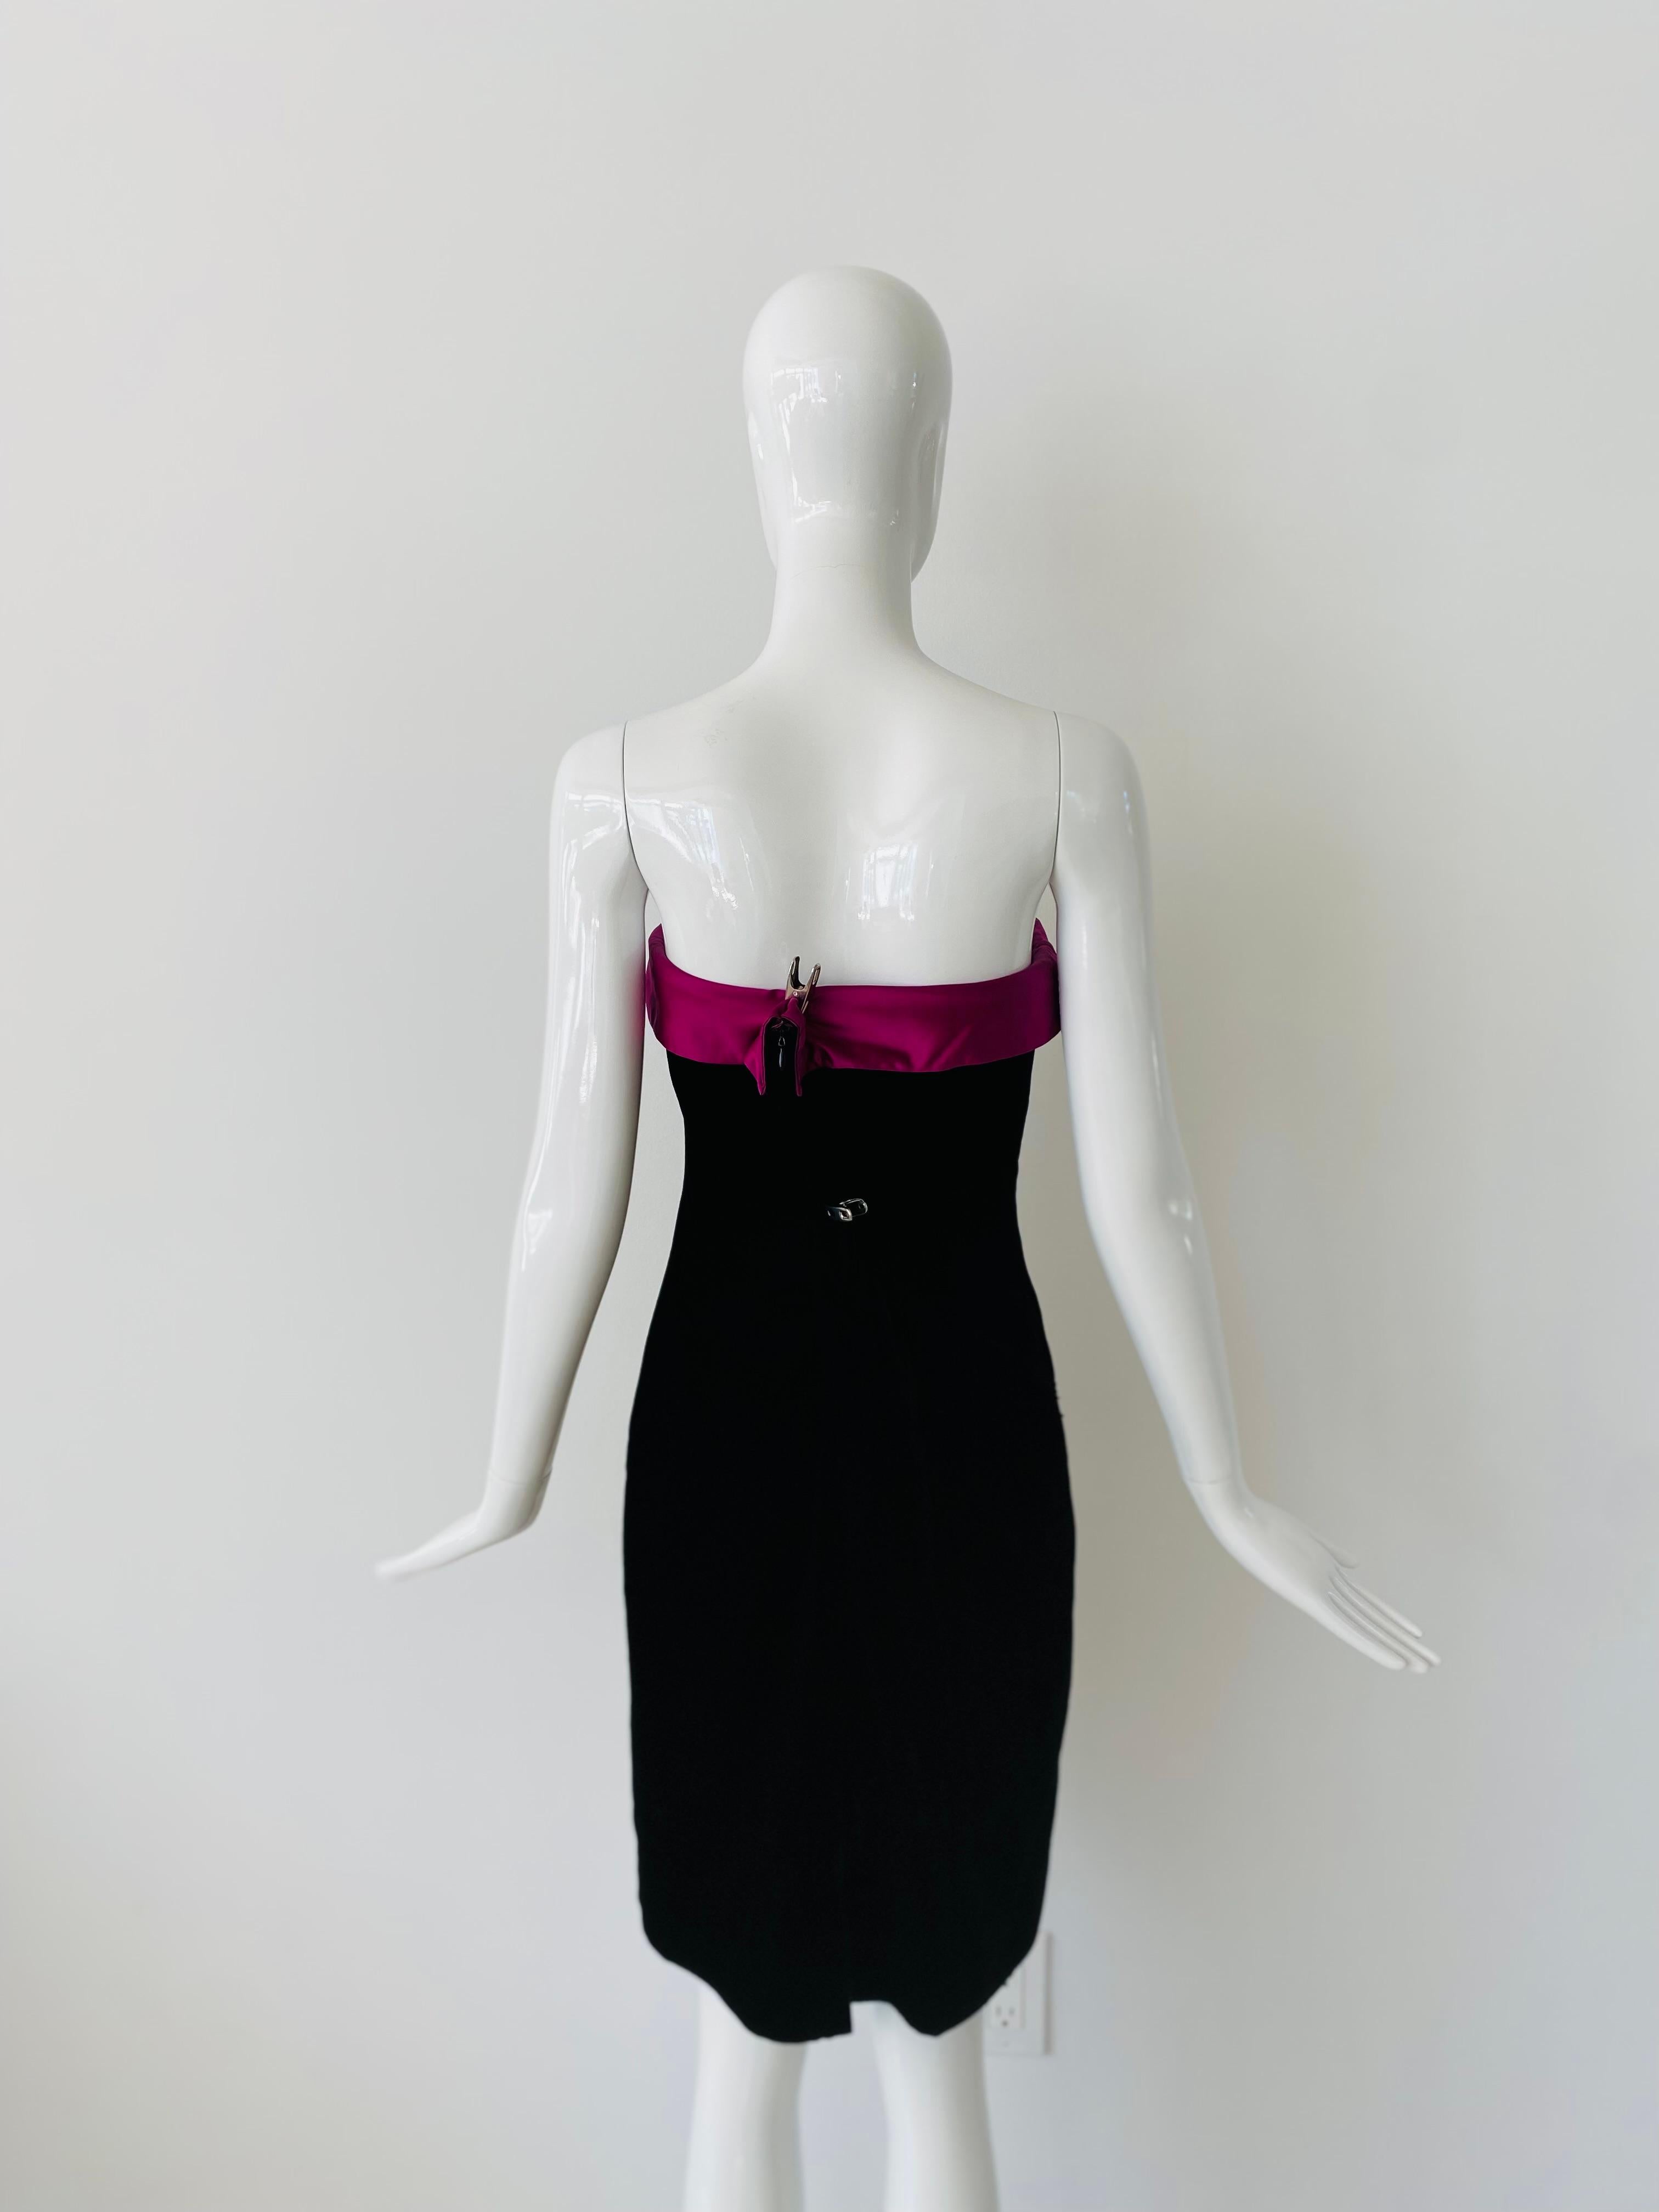 1980s Escada Couture black velvet strapless short cocktail dress. It has a magenta satin strip folded over at the top and a colorful heart embroidered with beads on the right side hip which doubles as a pocket. Heavy satin for the bustier portion of